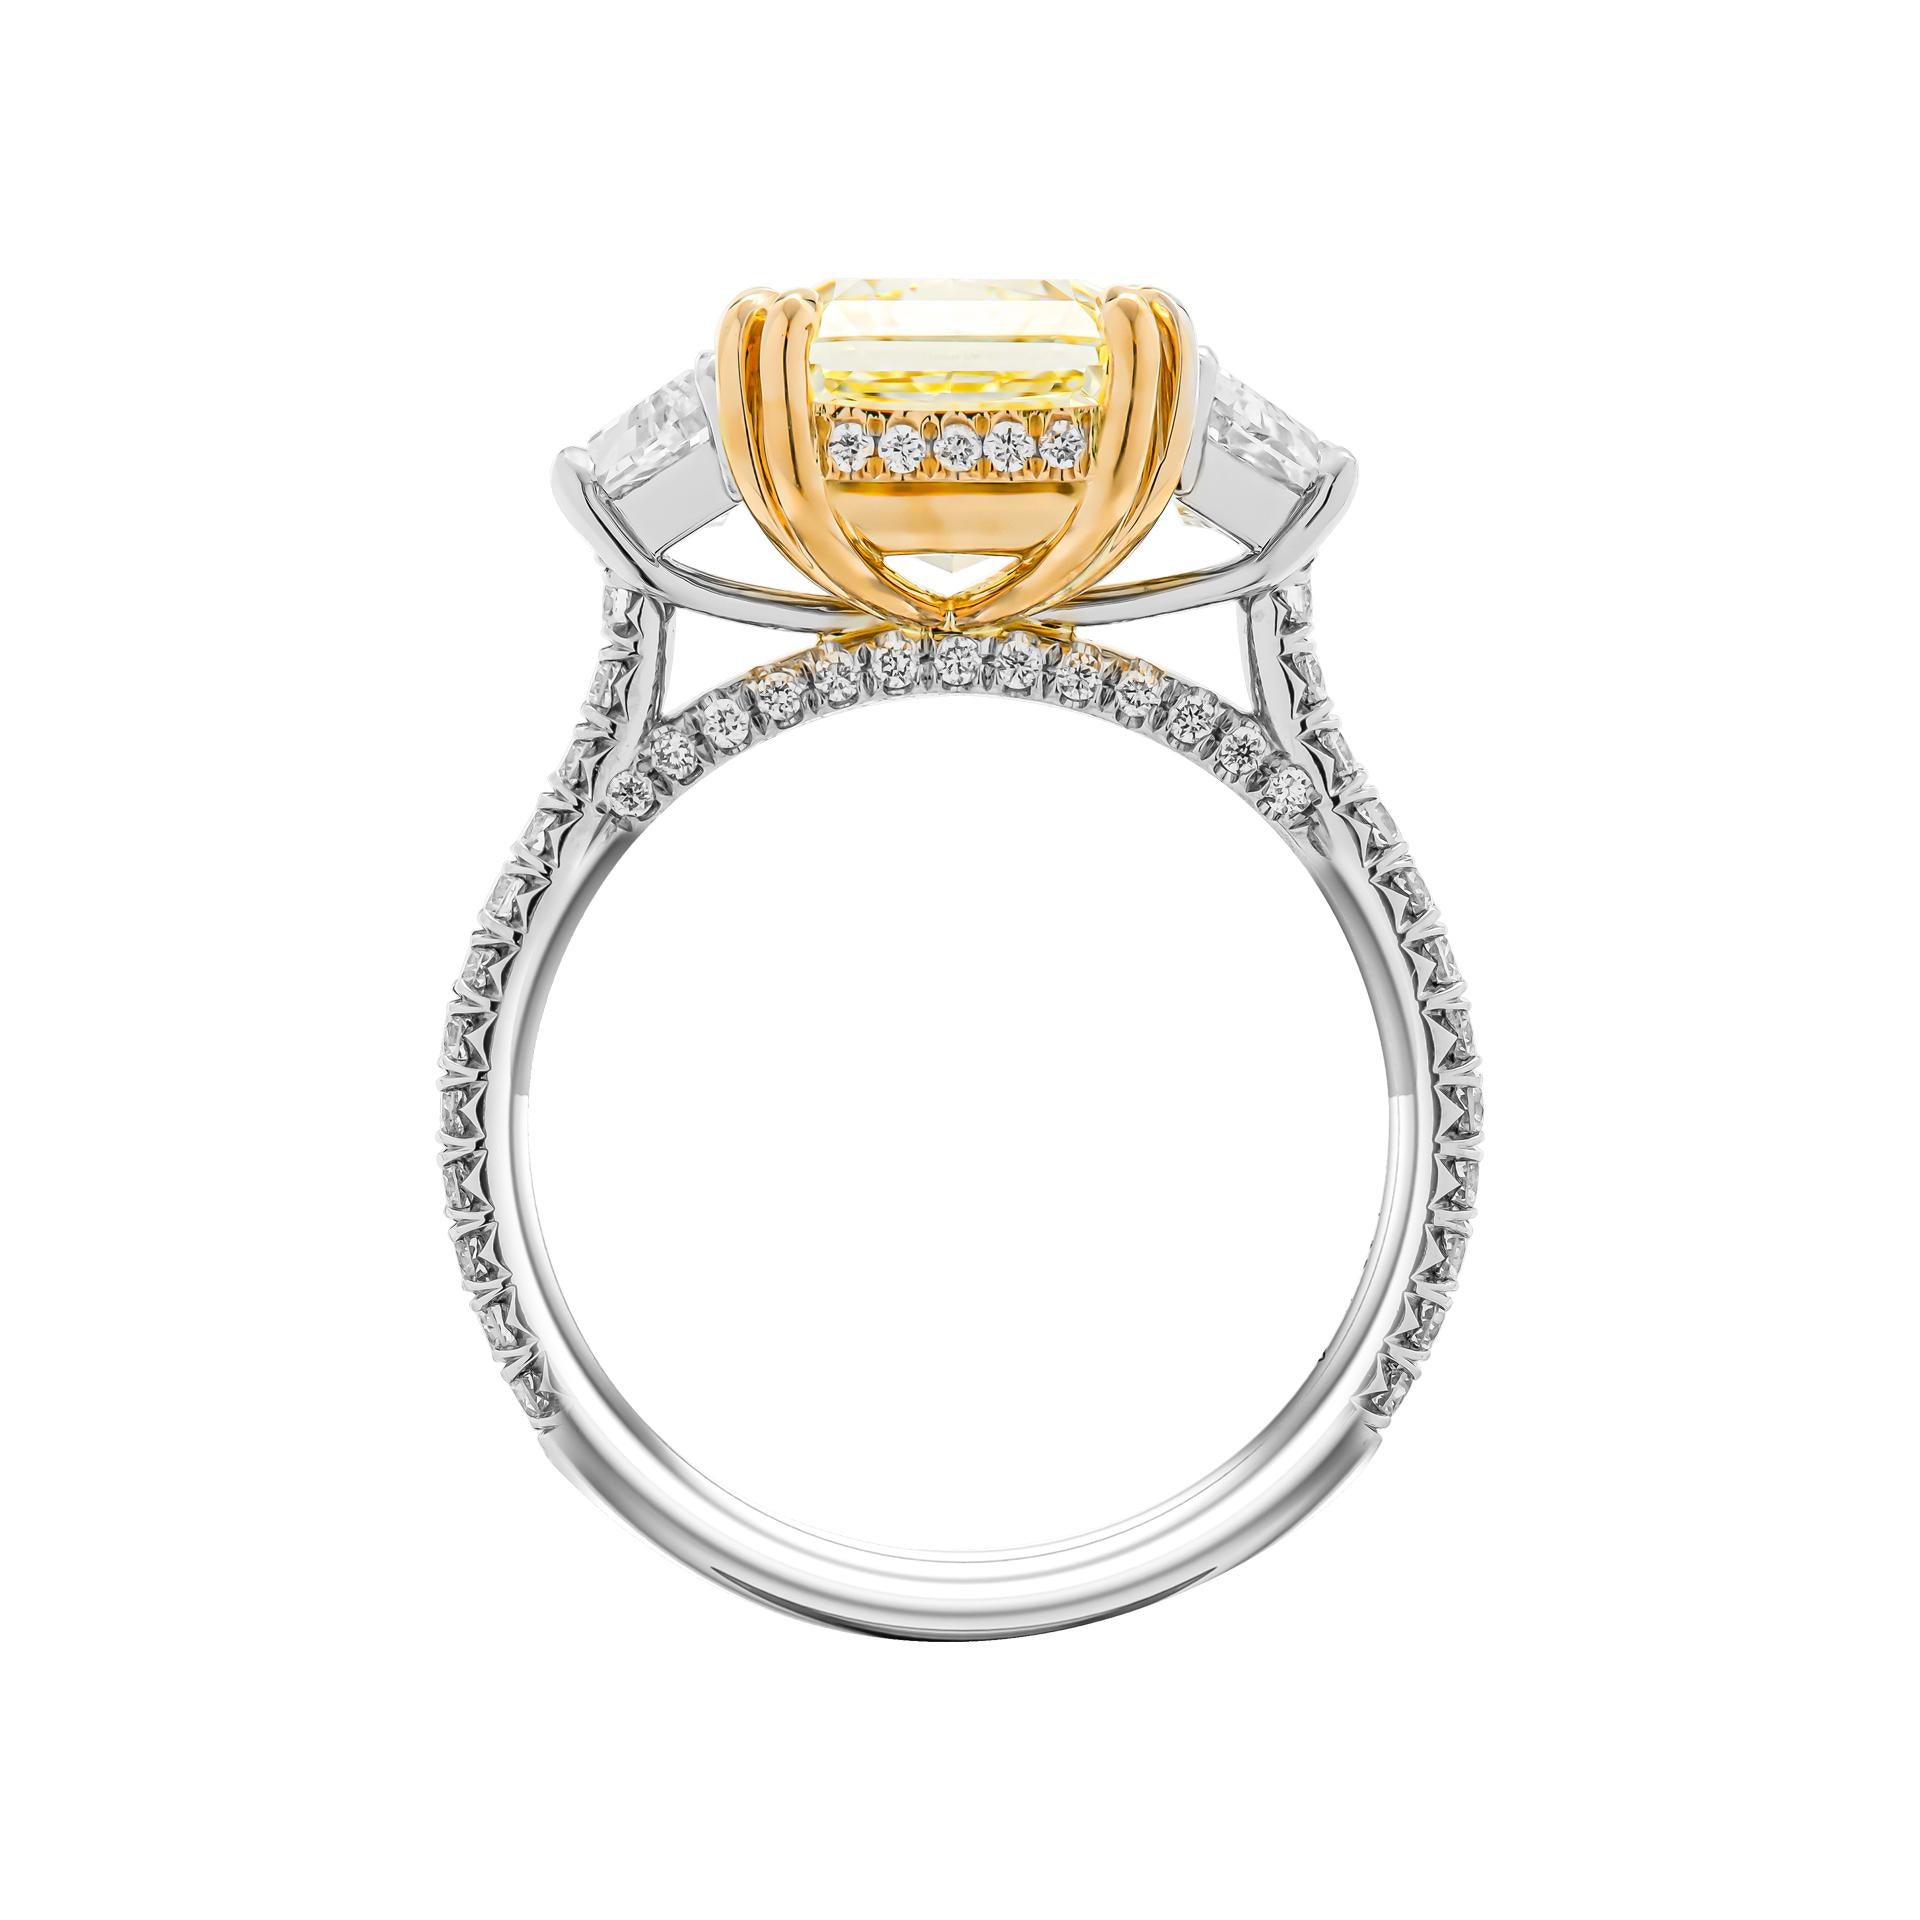 3 stone ring in Platinum & 18K Yellow Gold
Center stone: 4.50ct Natural Fancy Light Yellow Even VS1 GIA#1415233669 Radiant Shape Diamond Side stones: 0.93ct F color VS clarity 
Cathedral pave shank, gallery & bridge total carat weight of small